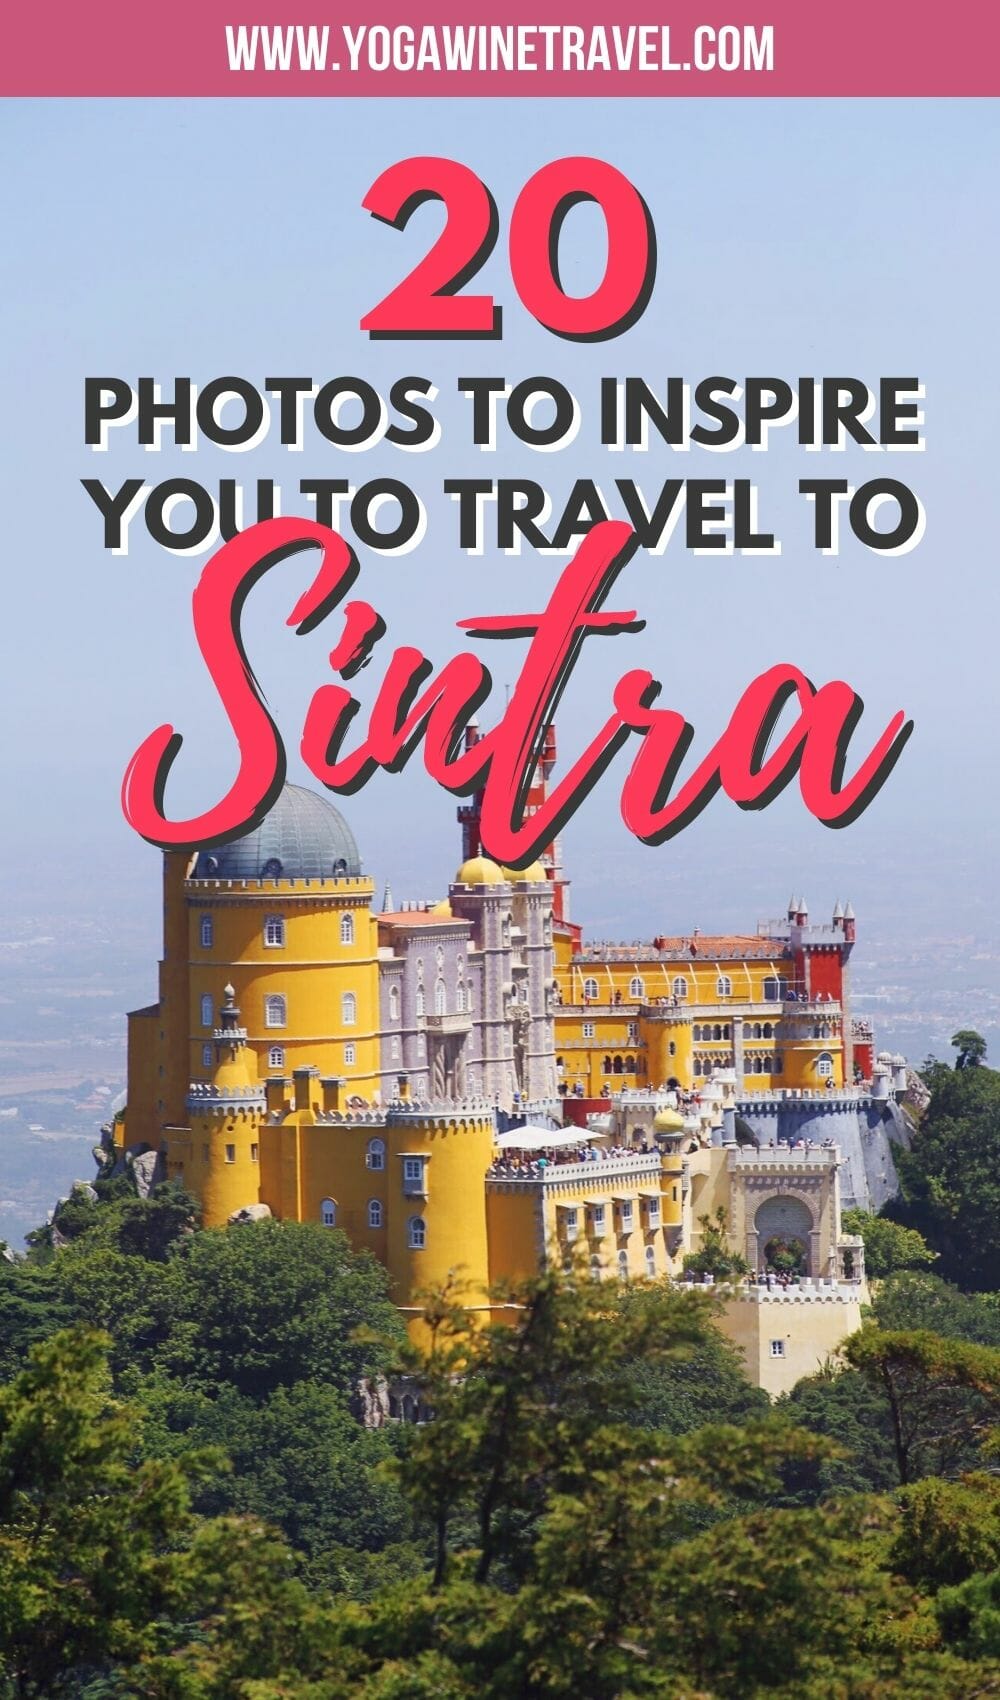 Pena Palace in Sintra Portugal with text overlay